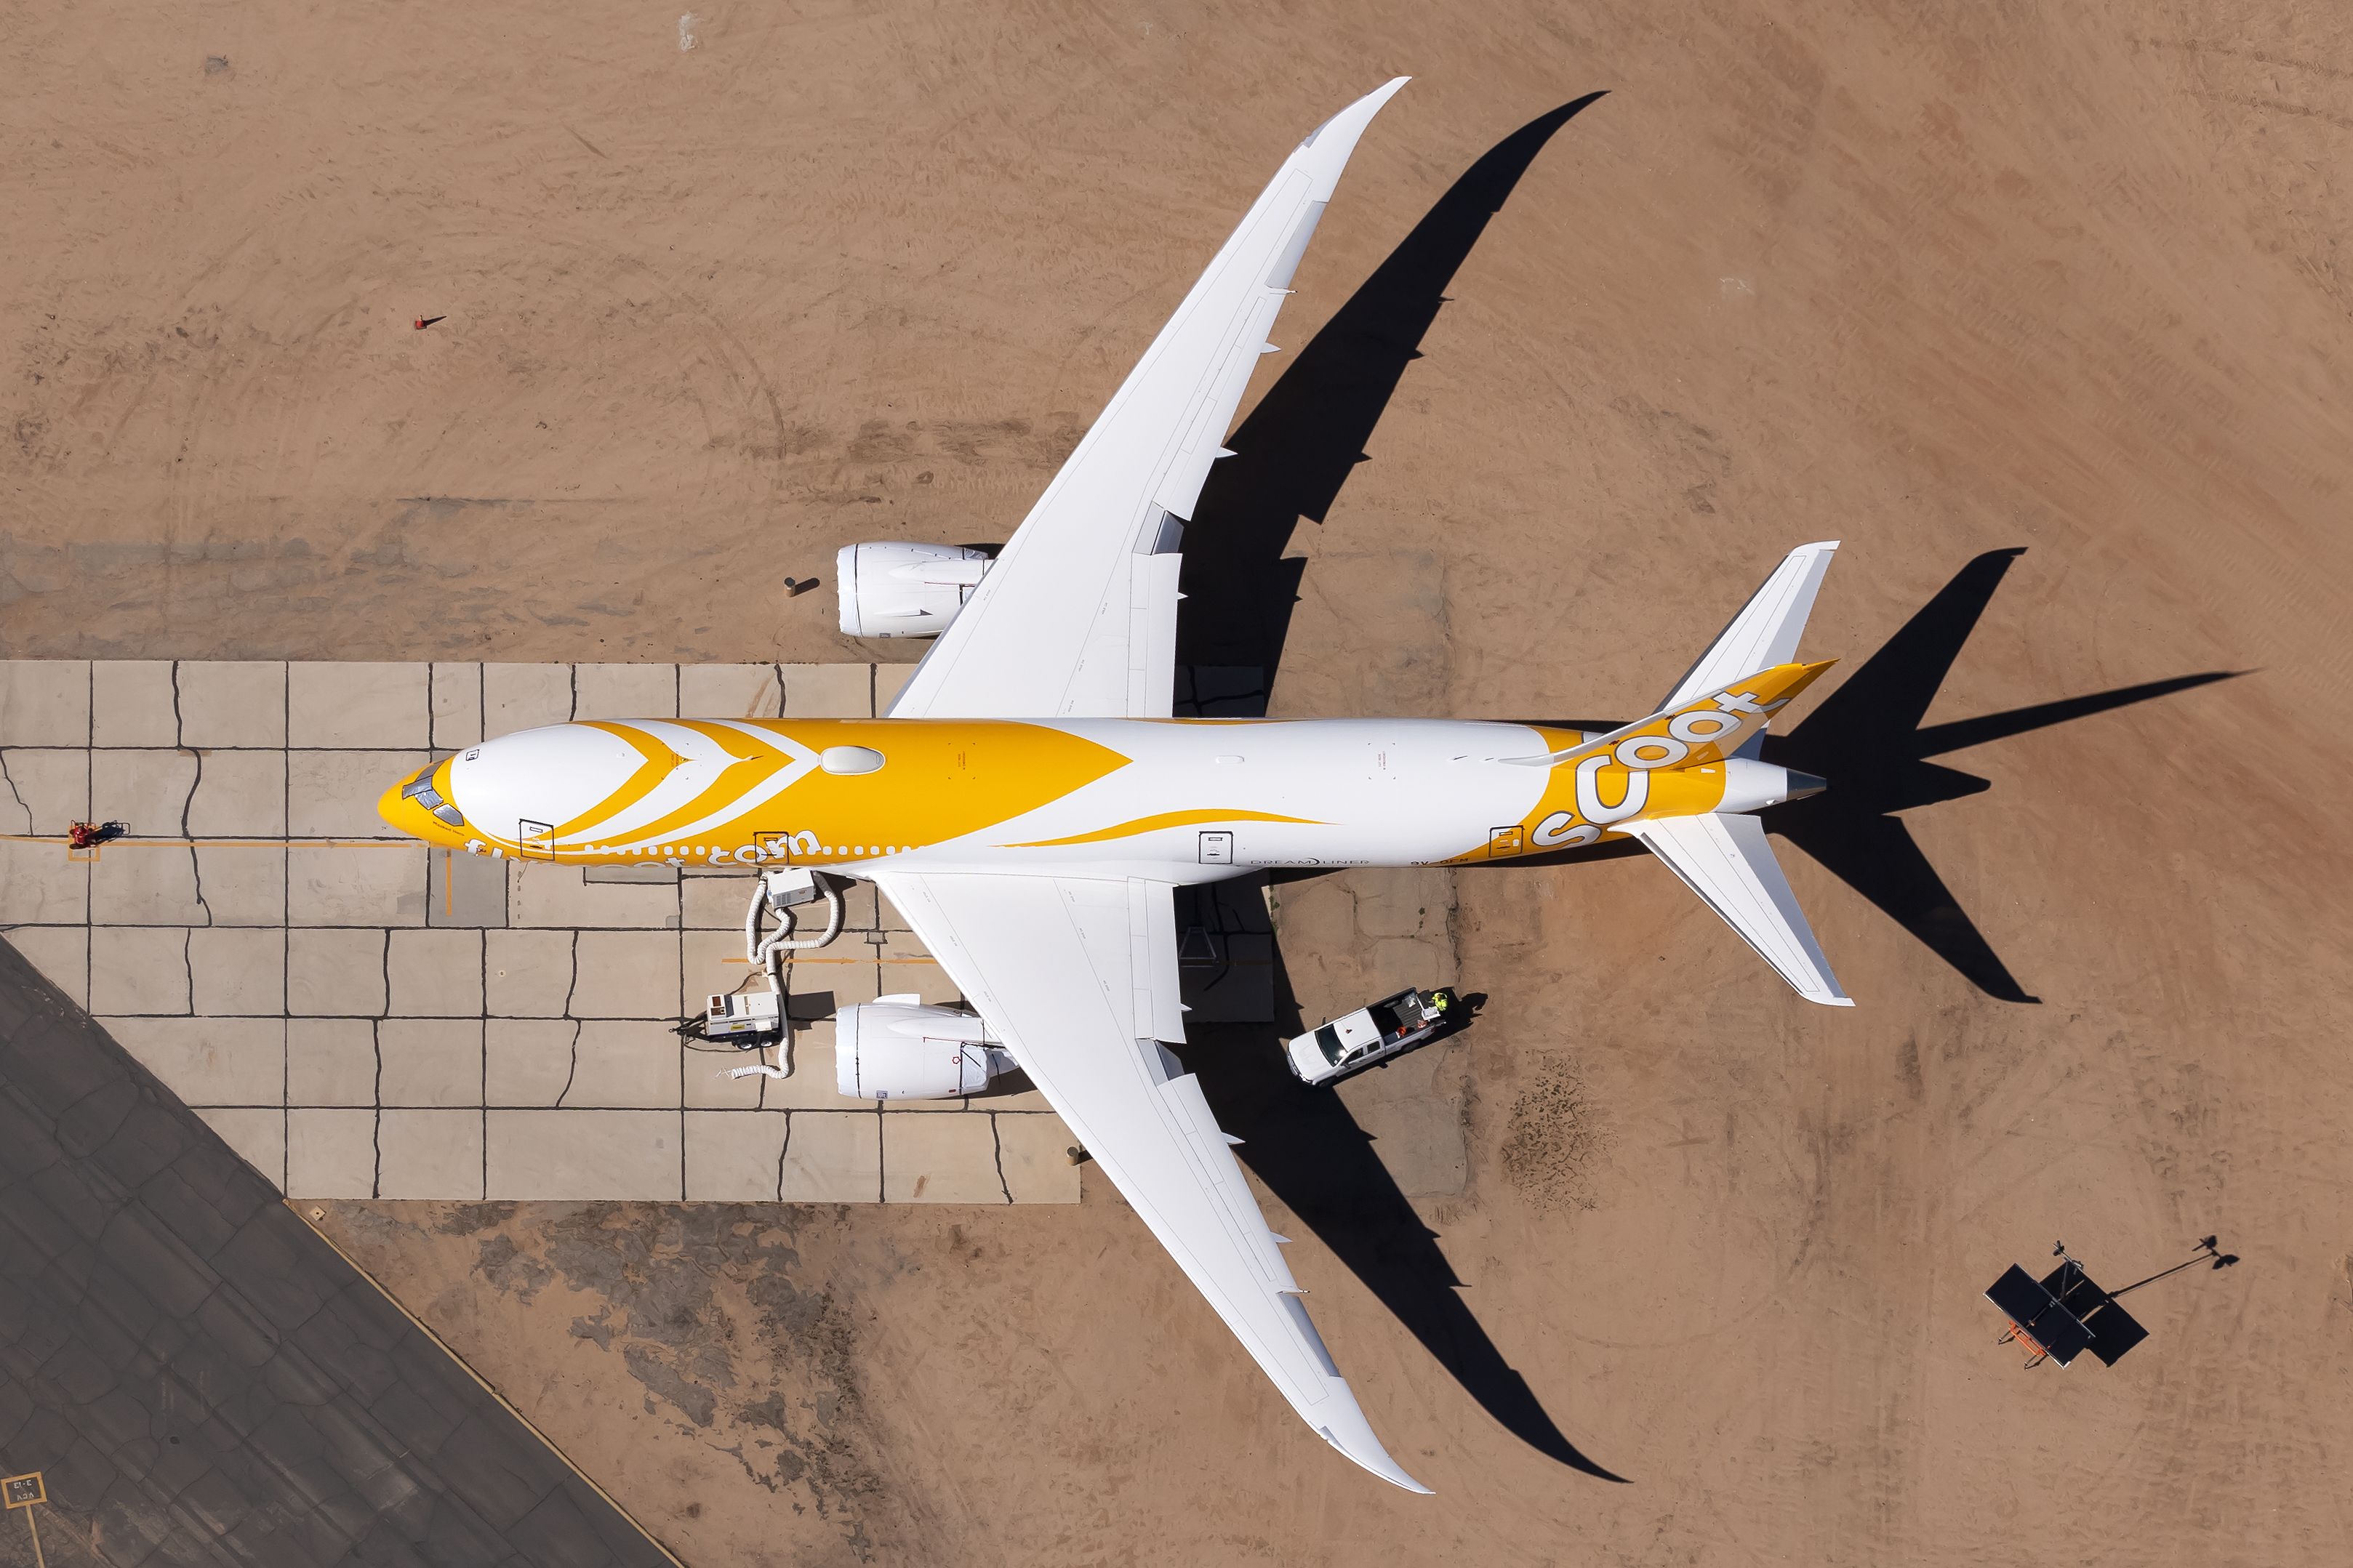 Scoot Boeing 787-8